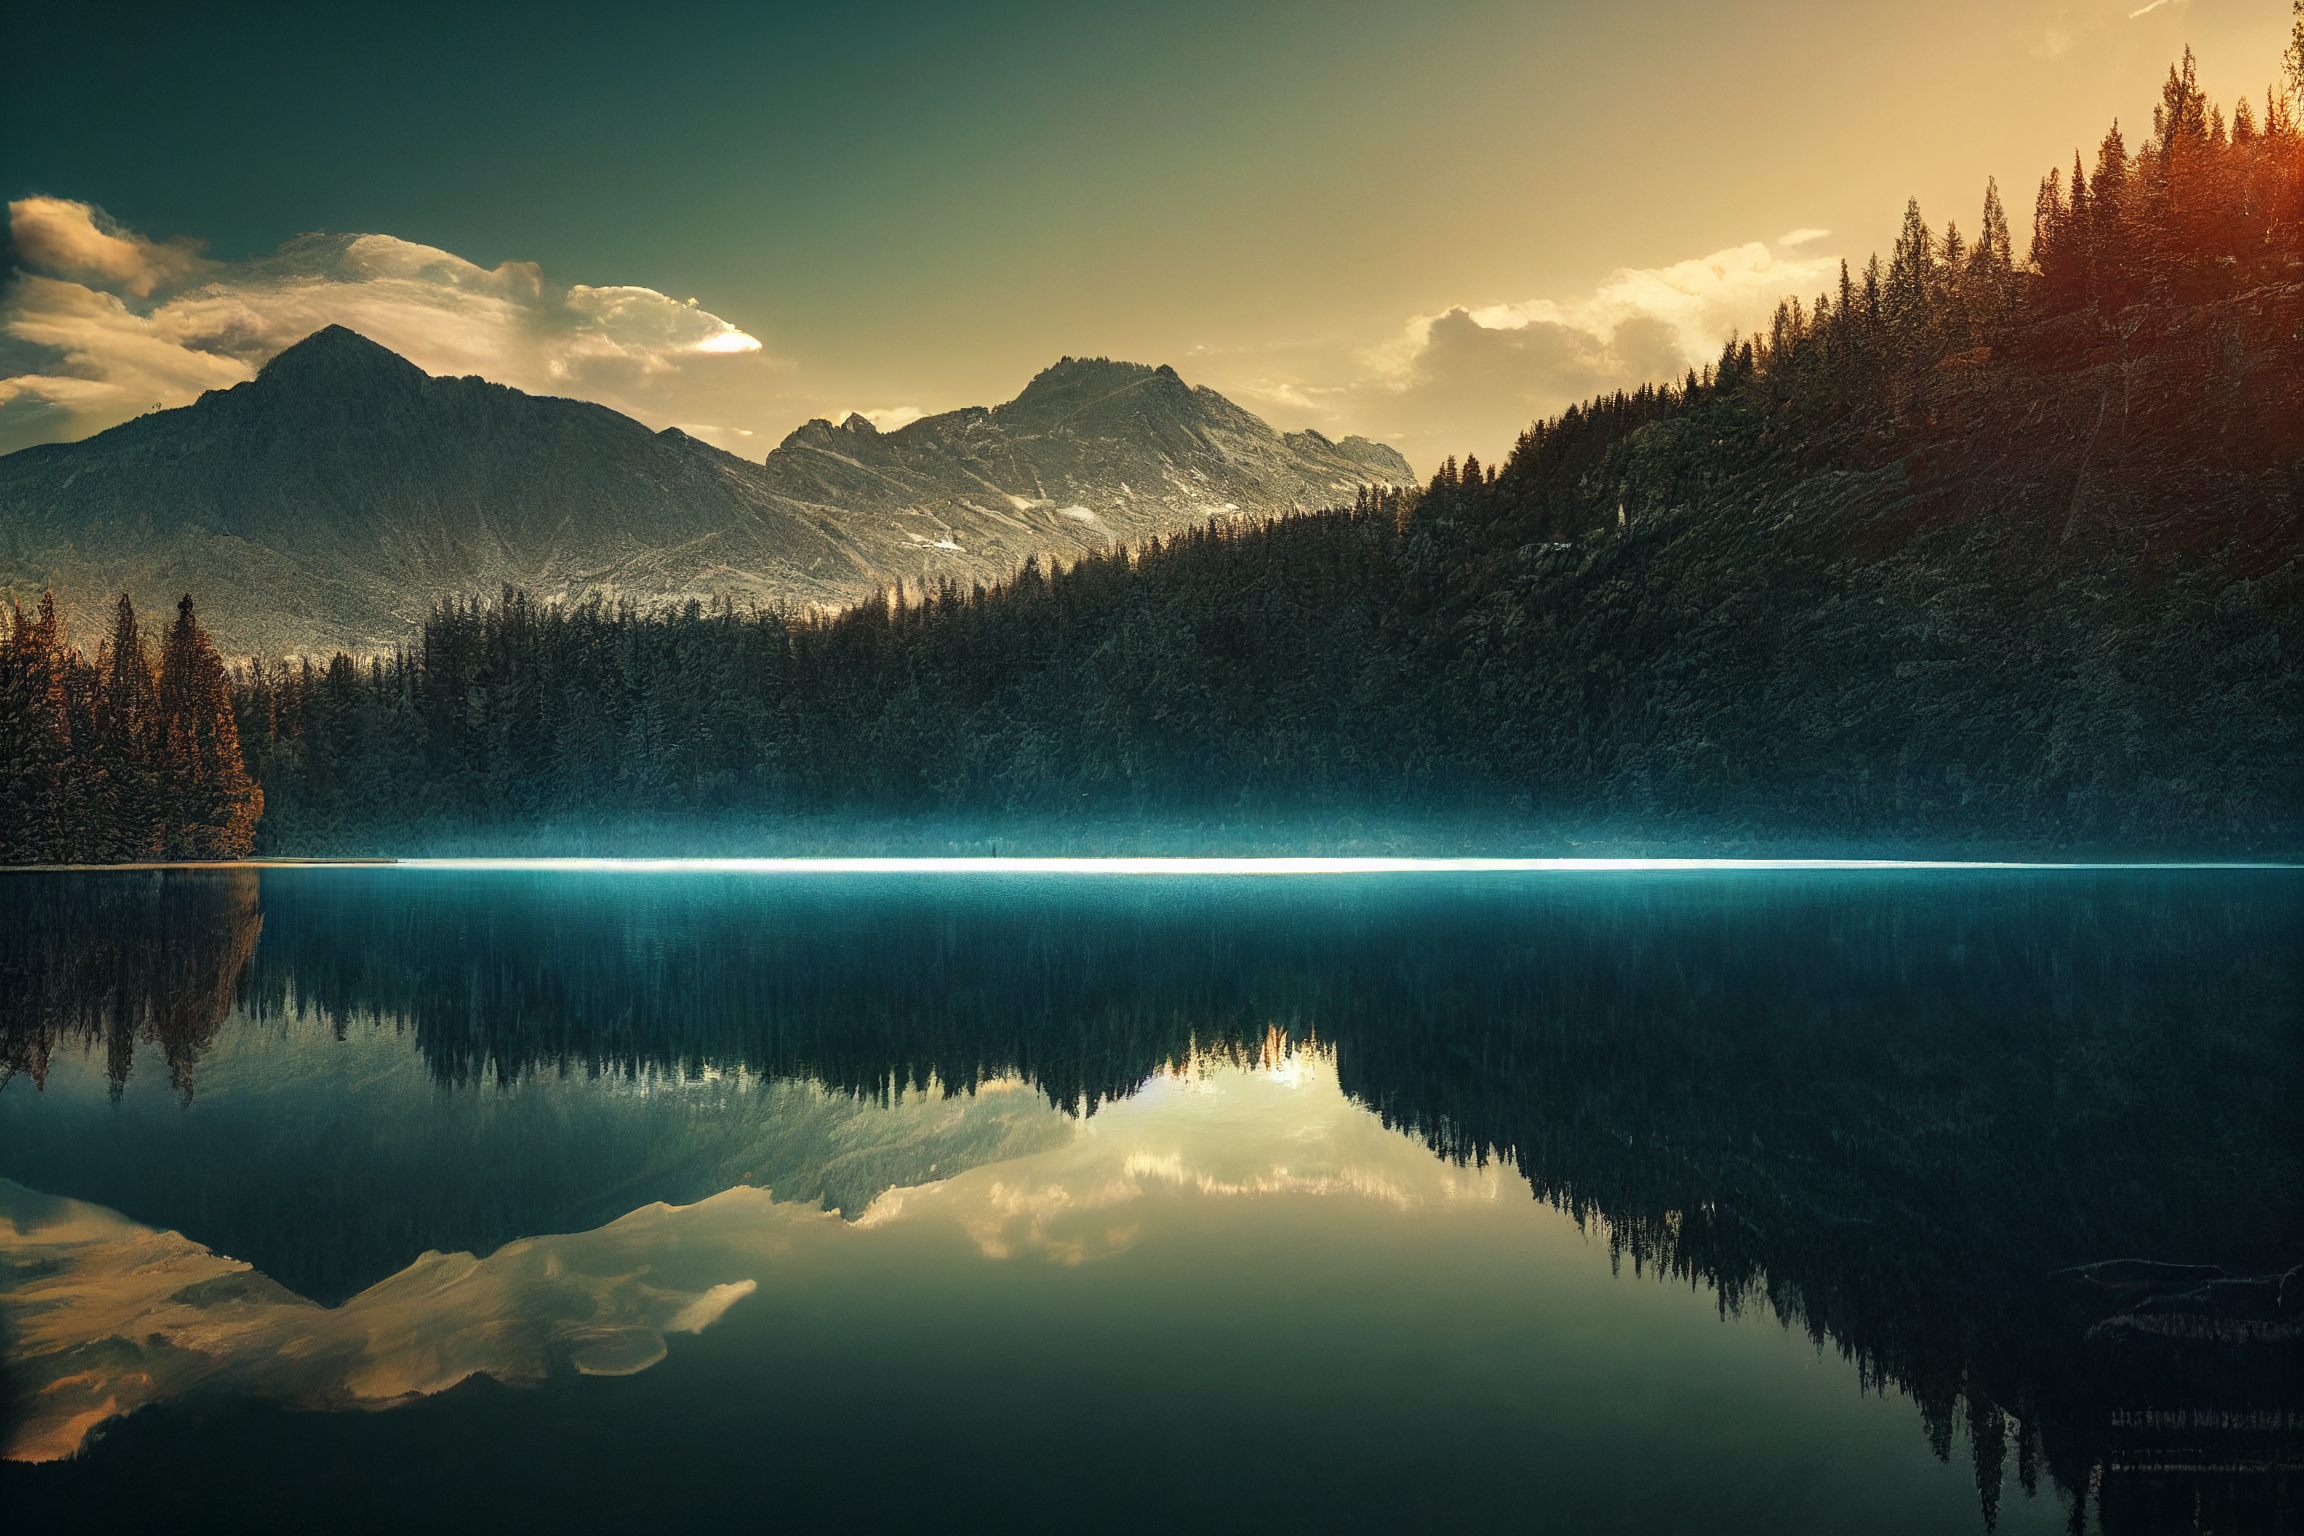 Landscape Mountains Lake Calm Water Reflection Clouds Nature Trees 2304x1536